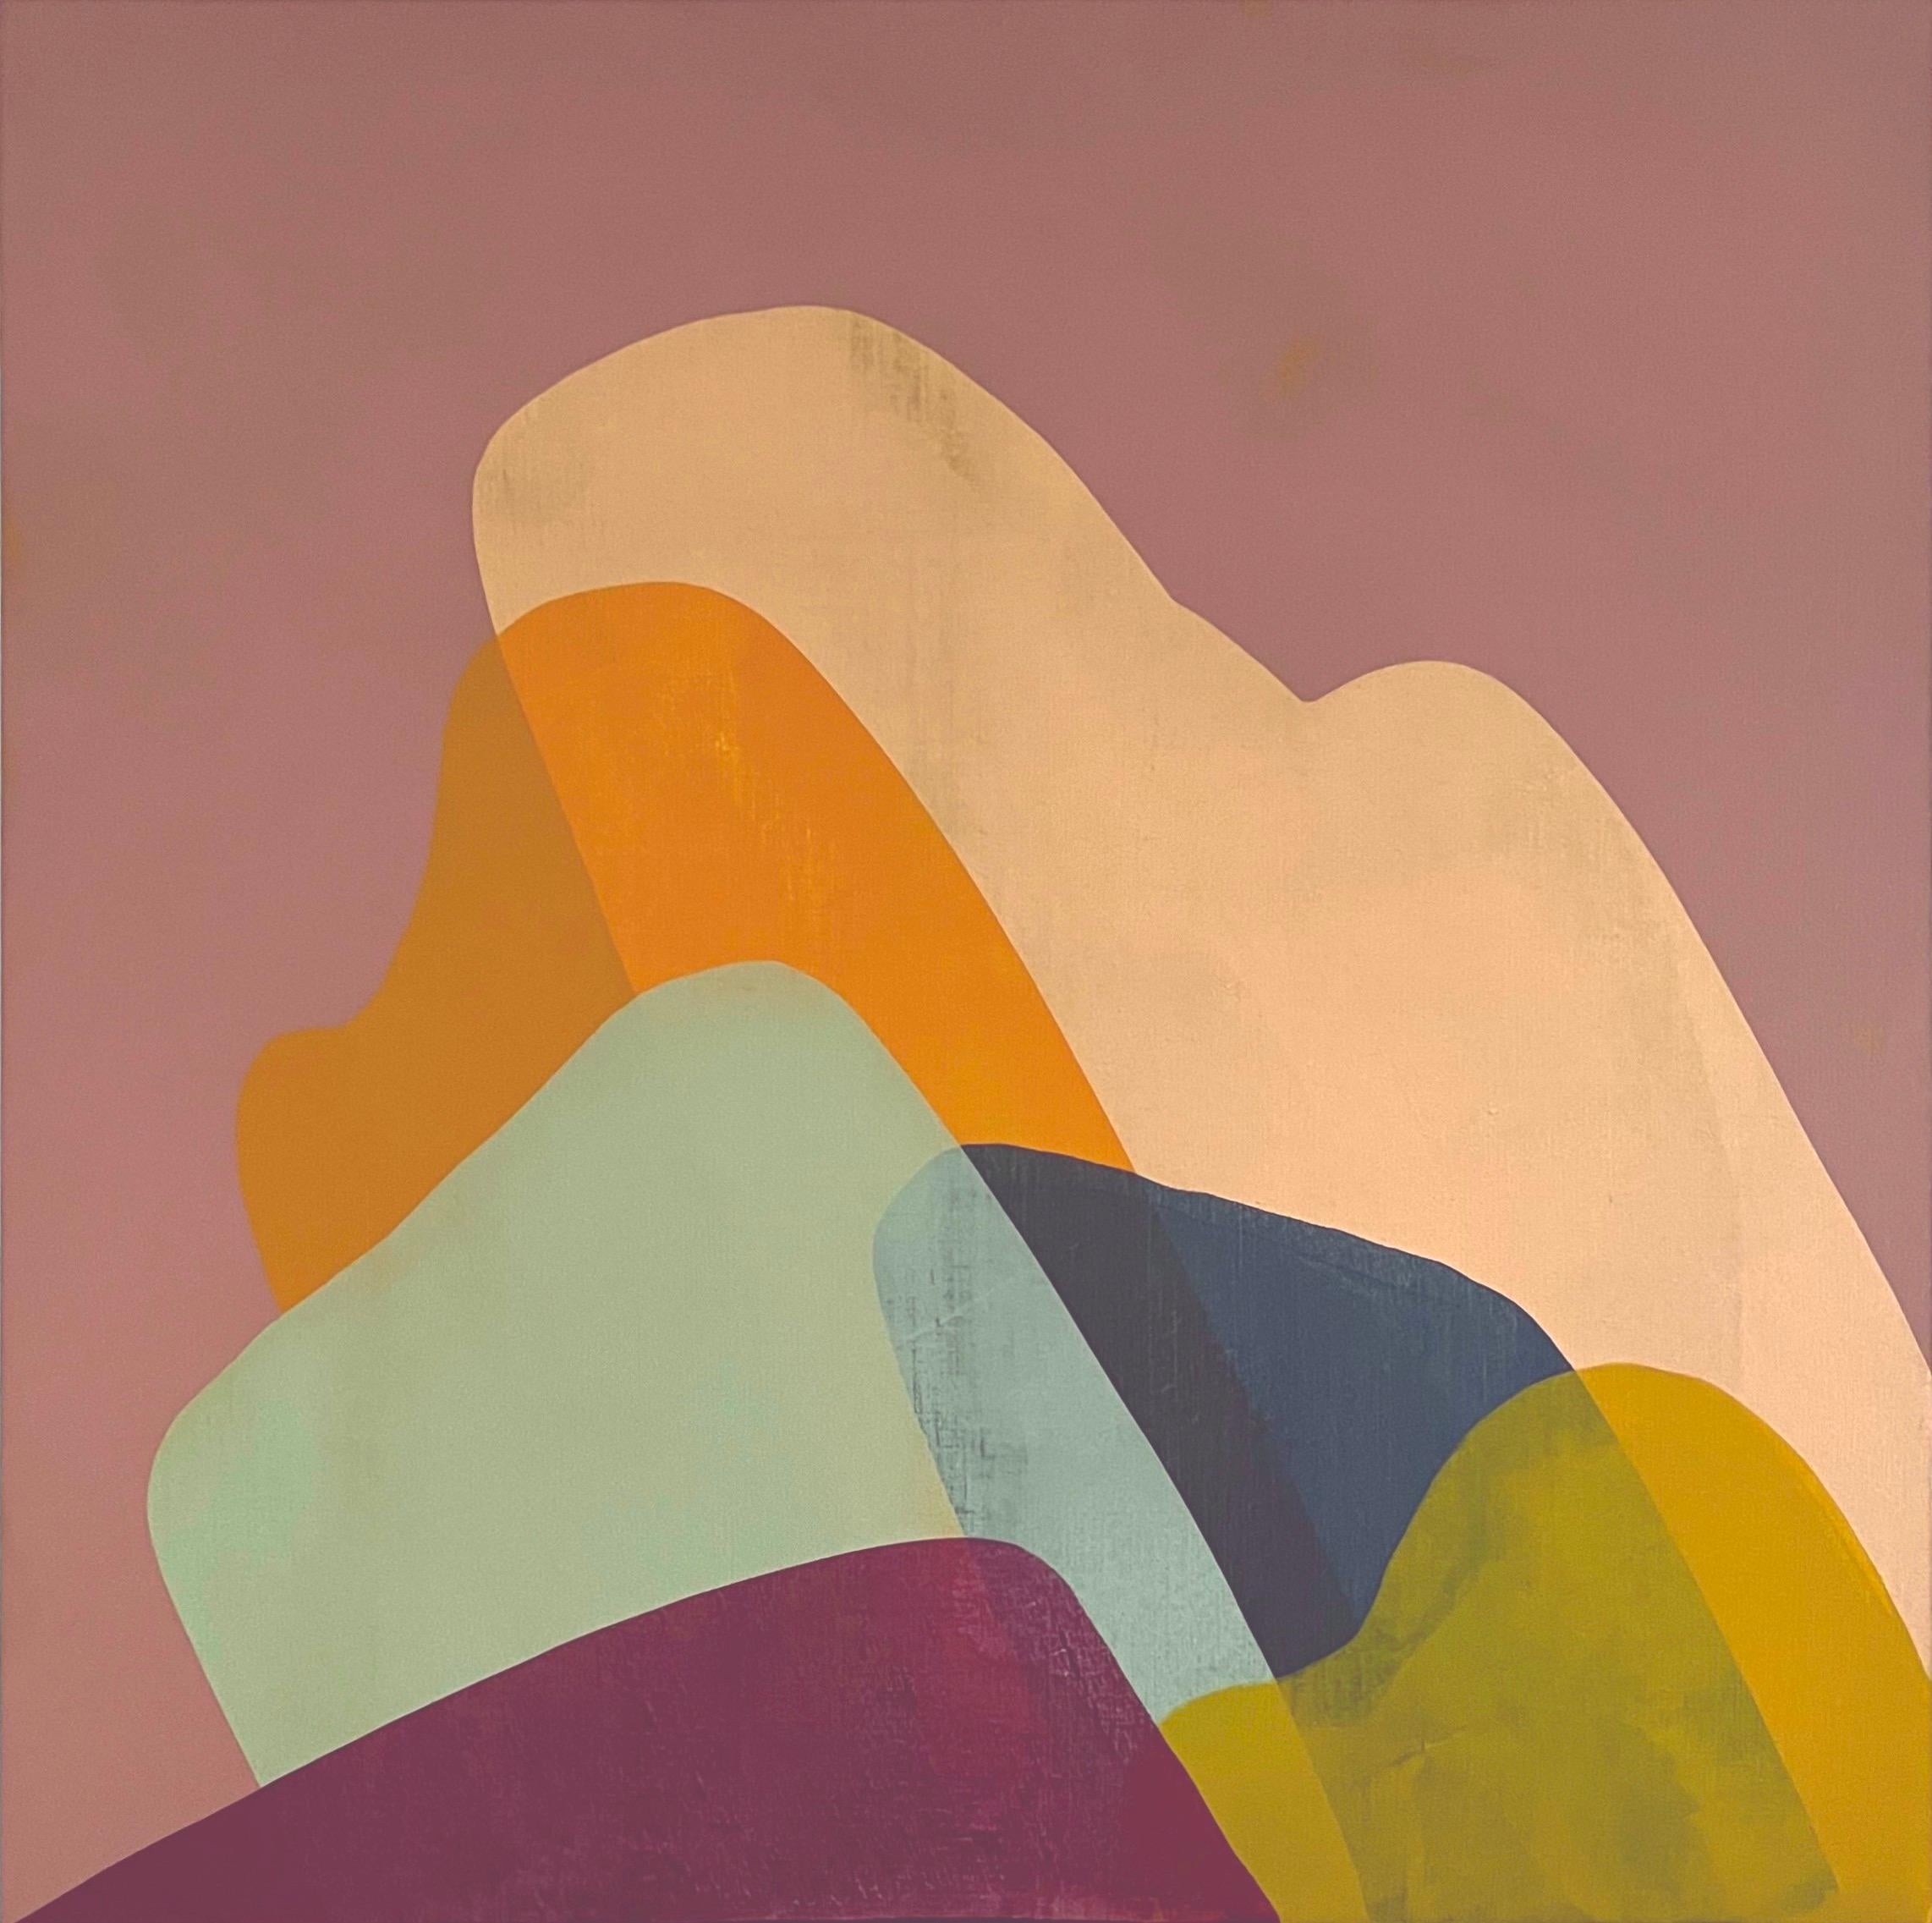 "My painting practice revolves around elements of landscapes such as hills, mountains, water, stones, and most recently icebergs, all of which are layered translucently as thin and permeable landscapes."